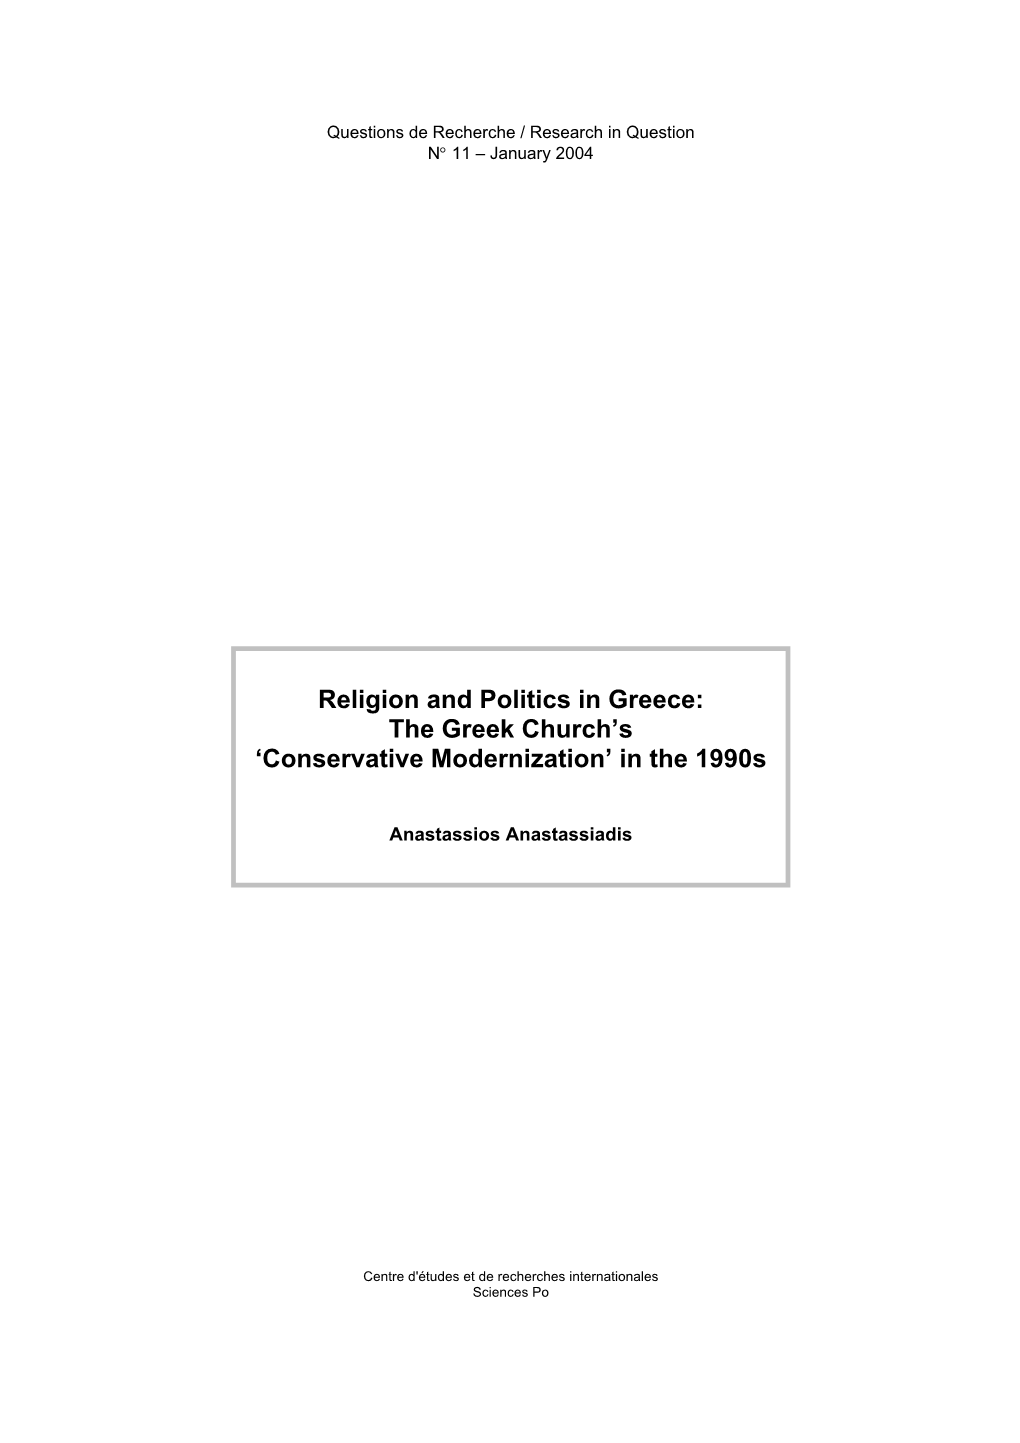 Religion and Politics in Greece: the Greek Church’S ‘Conservative Modernization’ in the 1990S